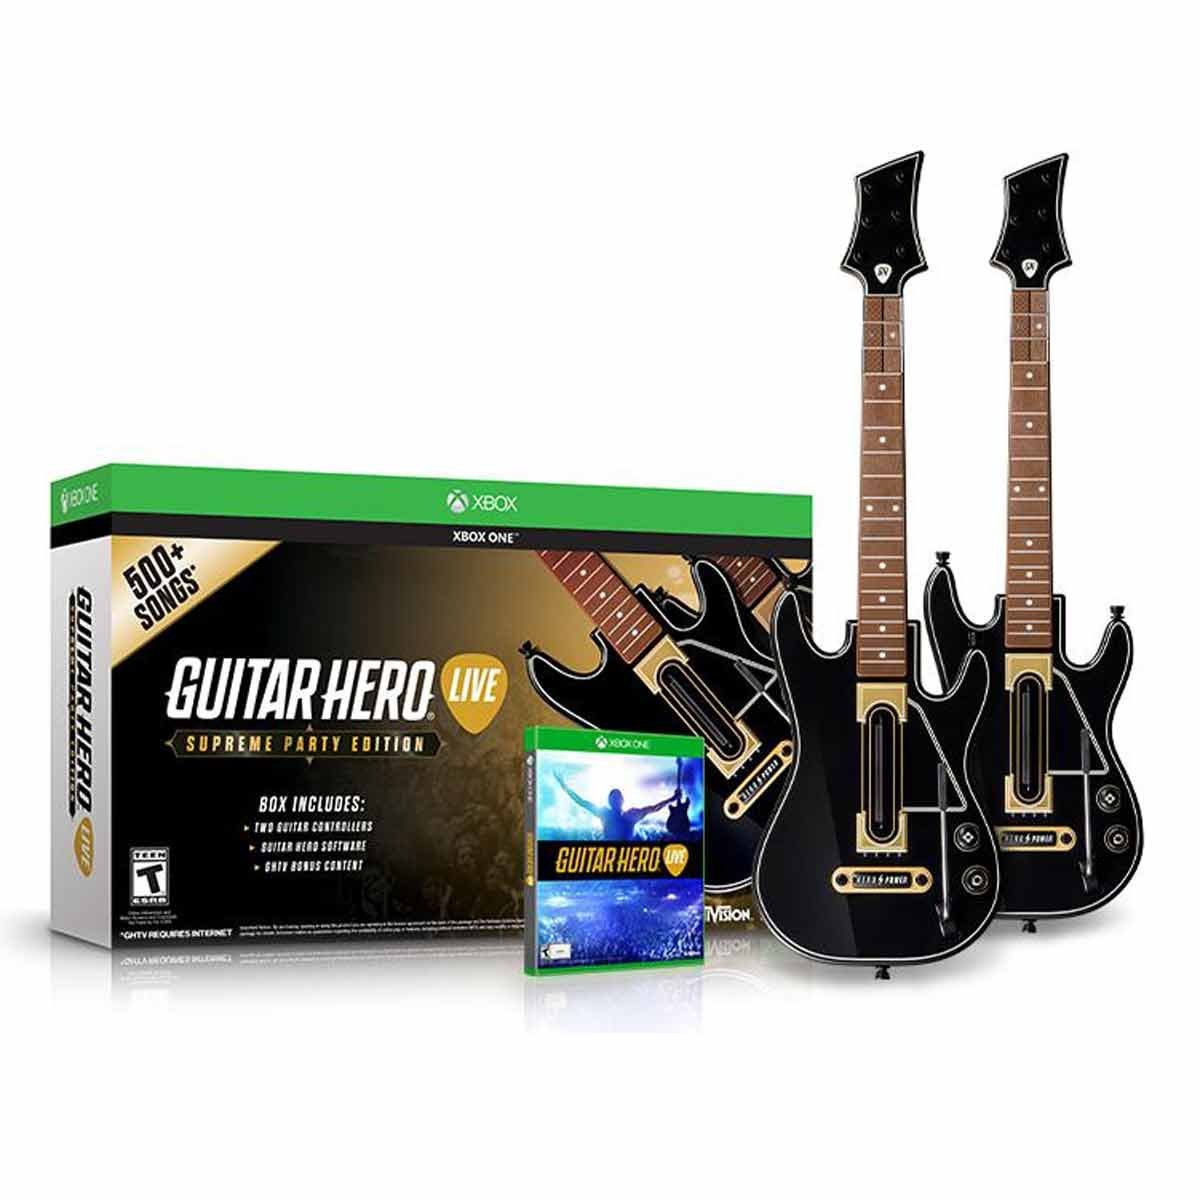 Xbox One Guitar Hero Live Supreme Party Edition